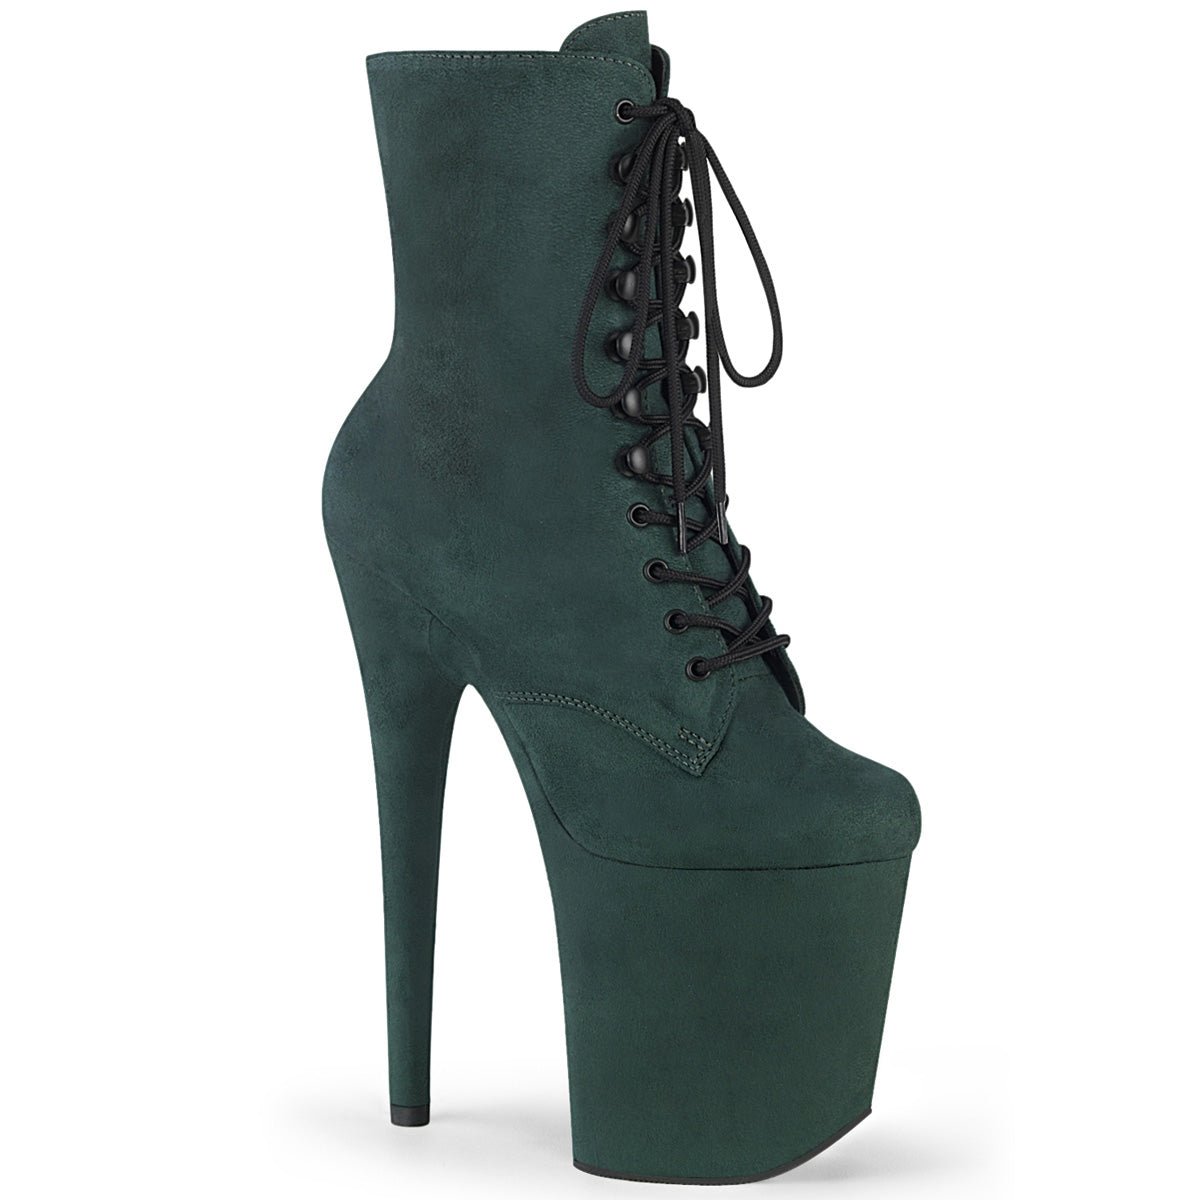 Pleaser Flamingo 1020FS Green - Model Express VancouverBoots